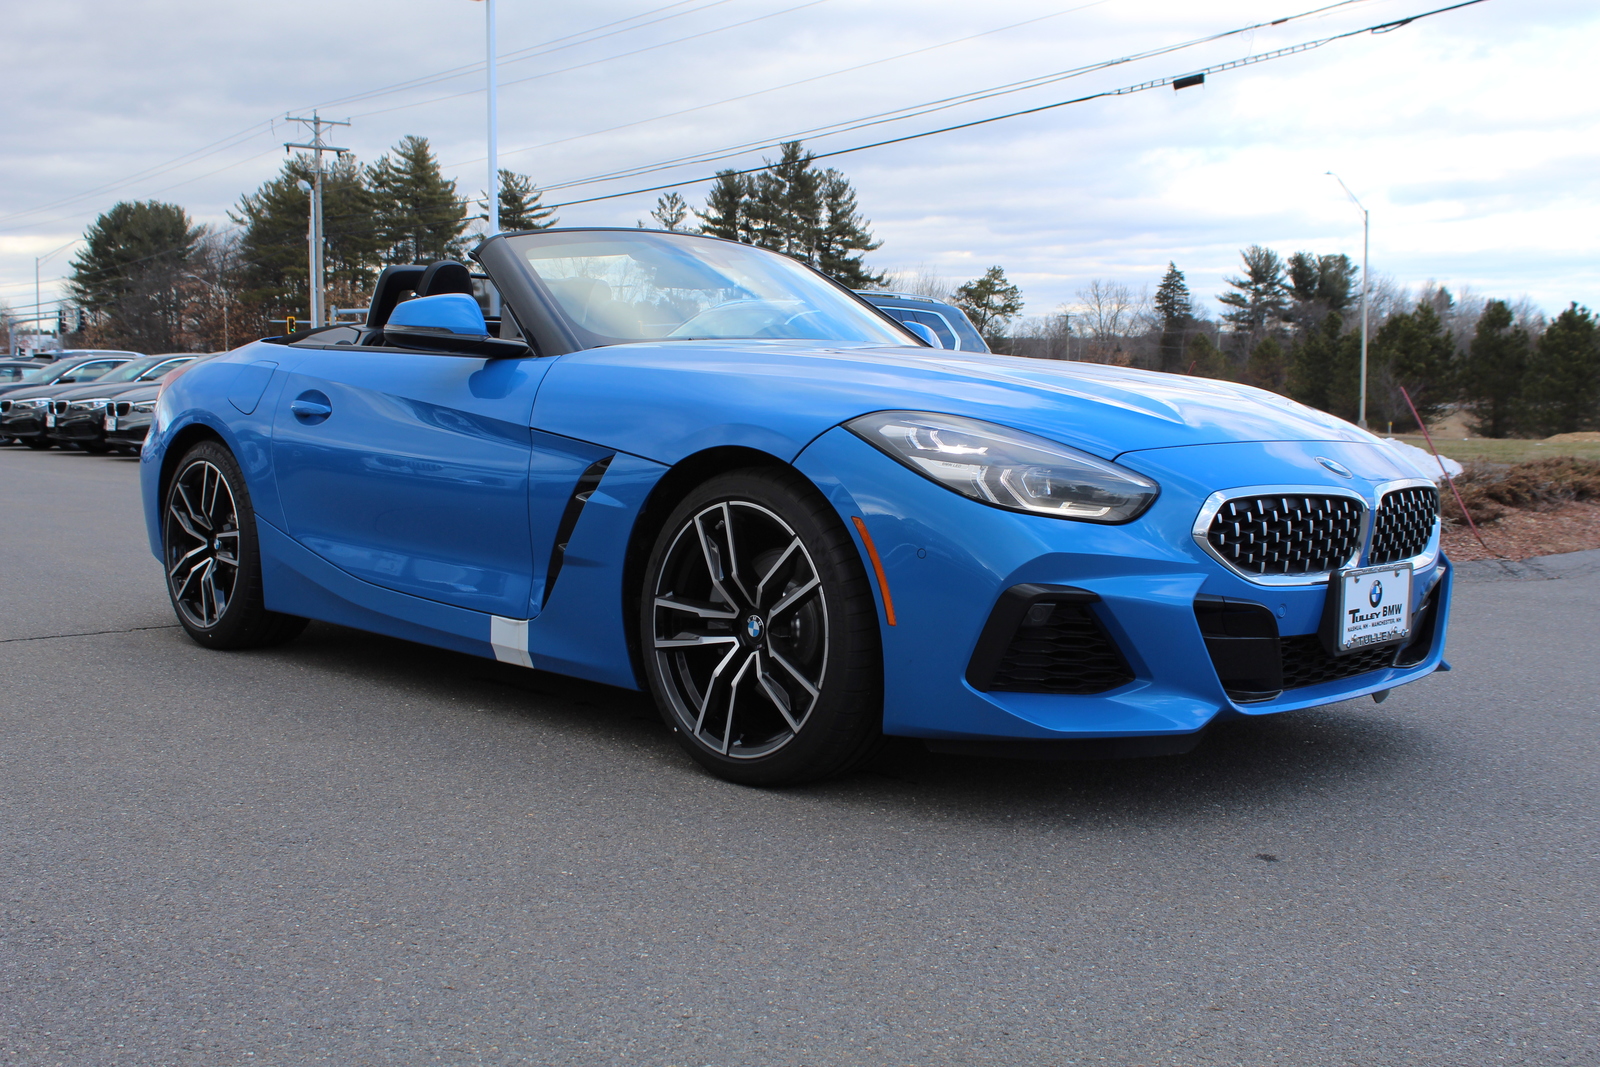 New 2020 BMW Z4 sDrive30i Roadster Convertible in Nashua #B20847